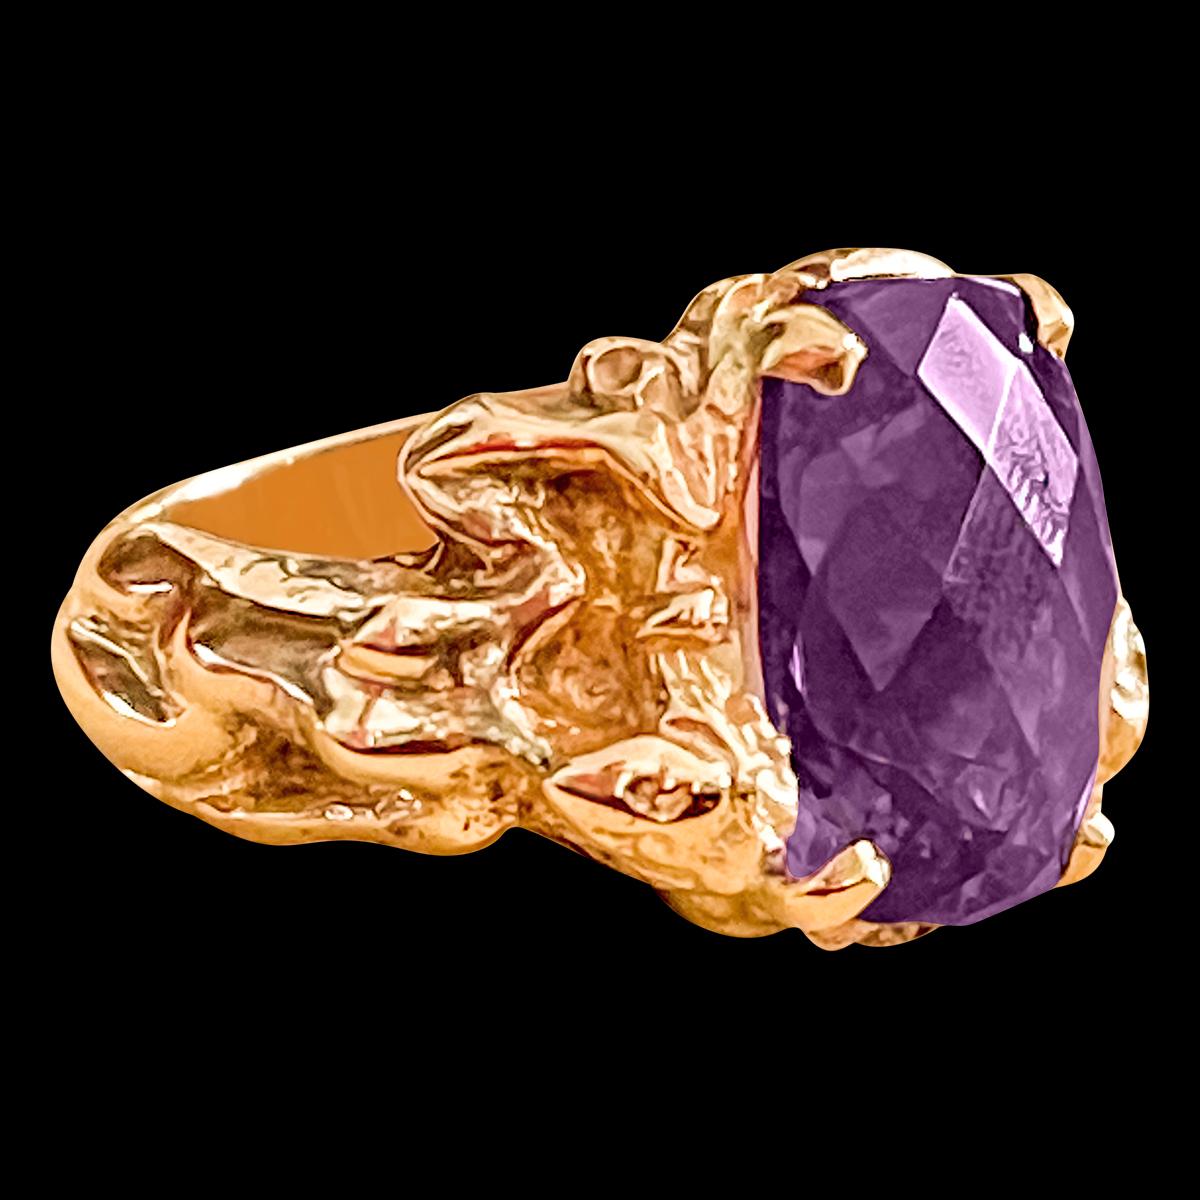 Approximately 7-8 Carat Checker board Amethyst Cocktail Ring in 14 Karat Yellow Gold Size 5
This is a Beautiful Cocktail ring ring which has a large approximately 7-8  carat of high quality Amethyst . Color and clarity is  nice. 
Very old Vintage